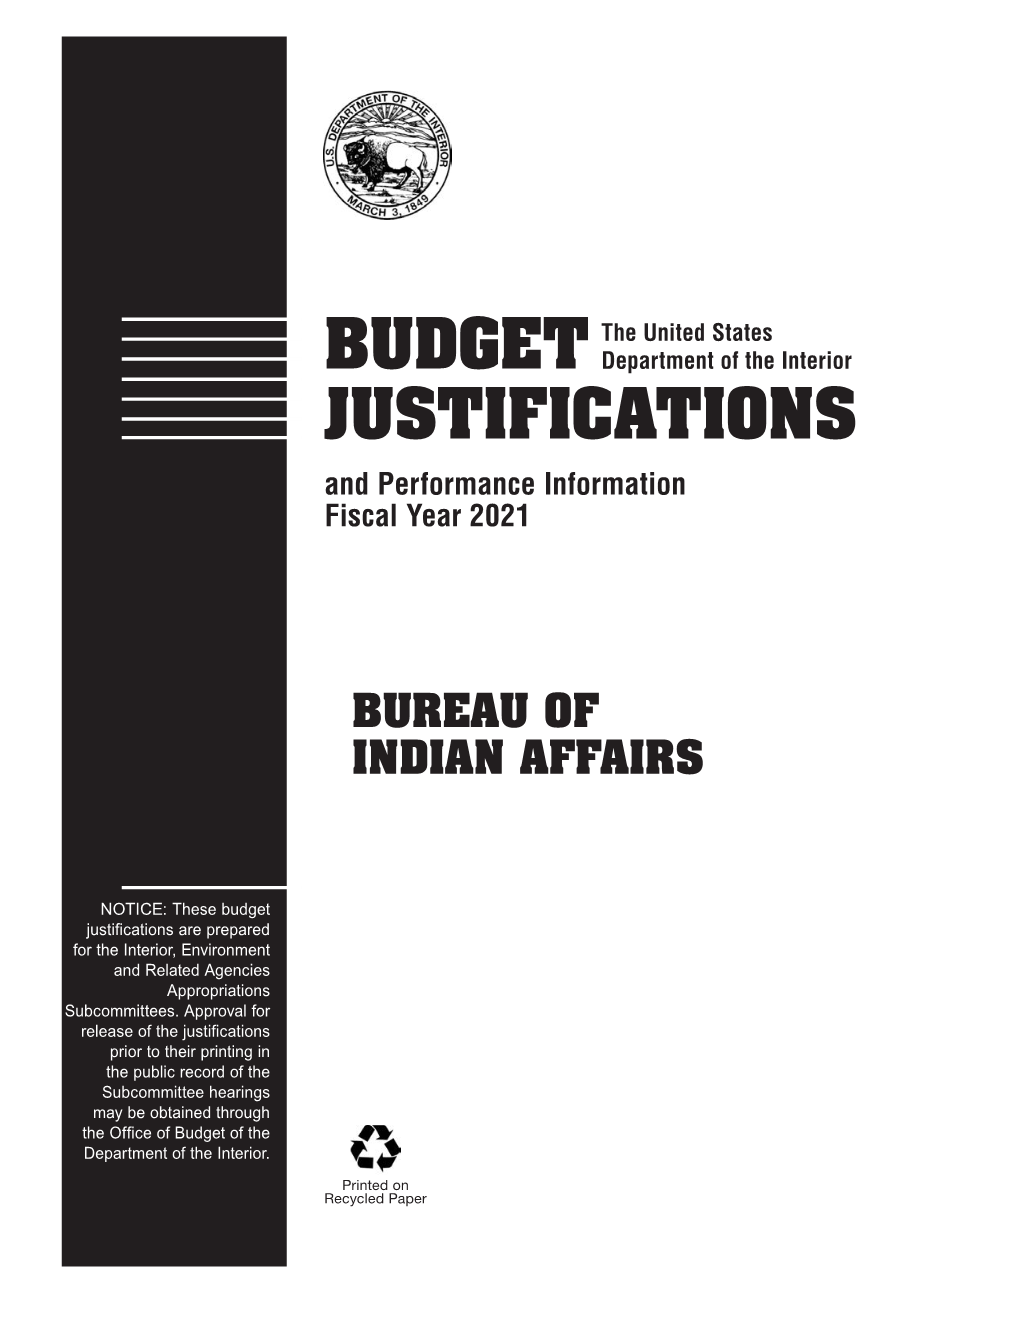 Indian Affairs Budget Justifications and Performance Information Fiscal